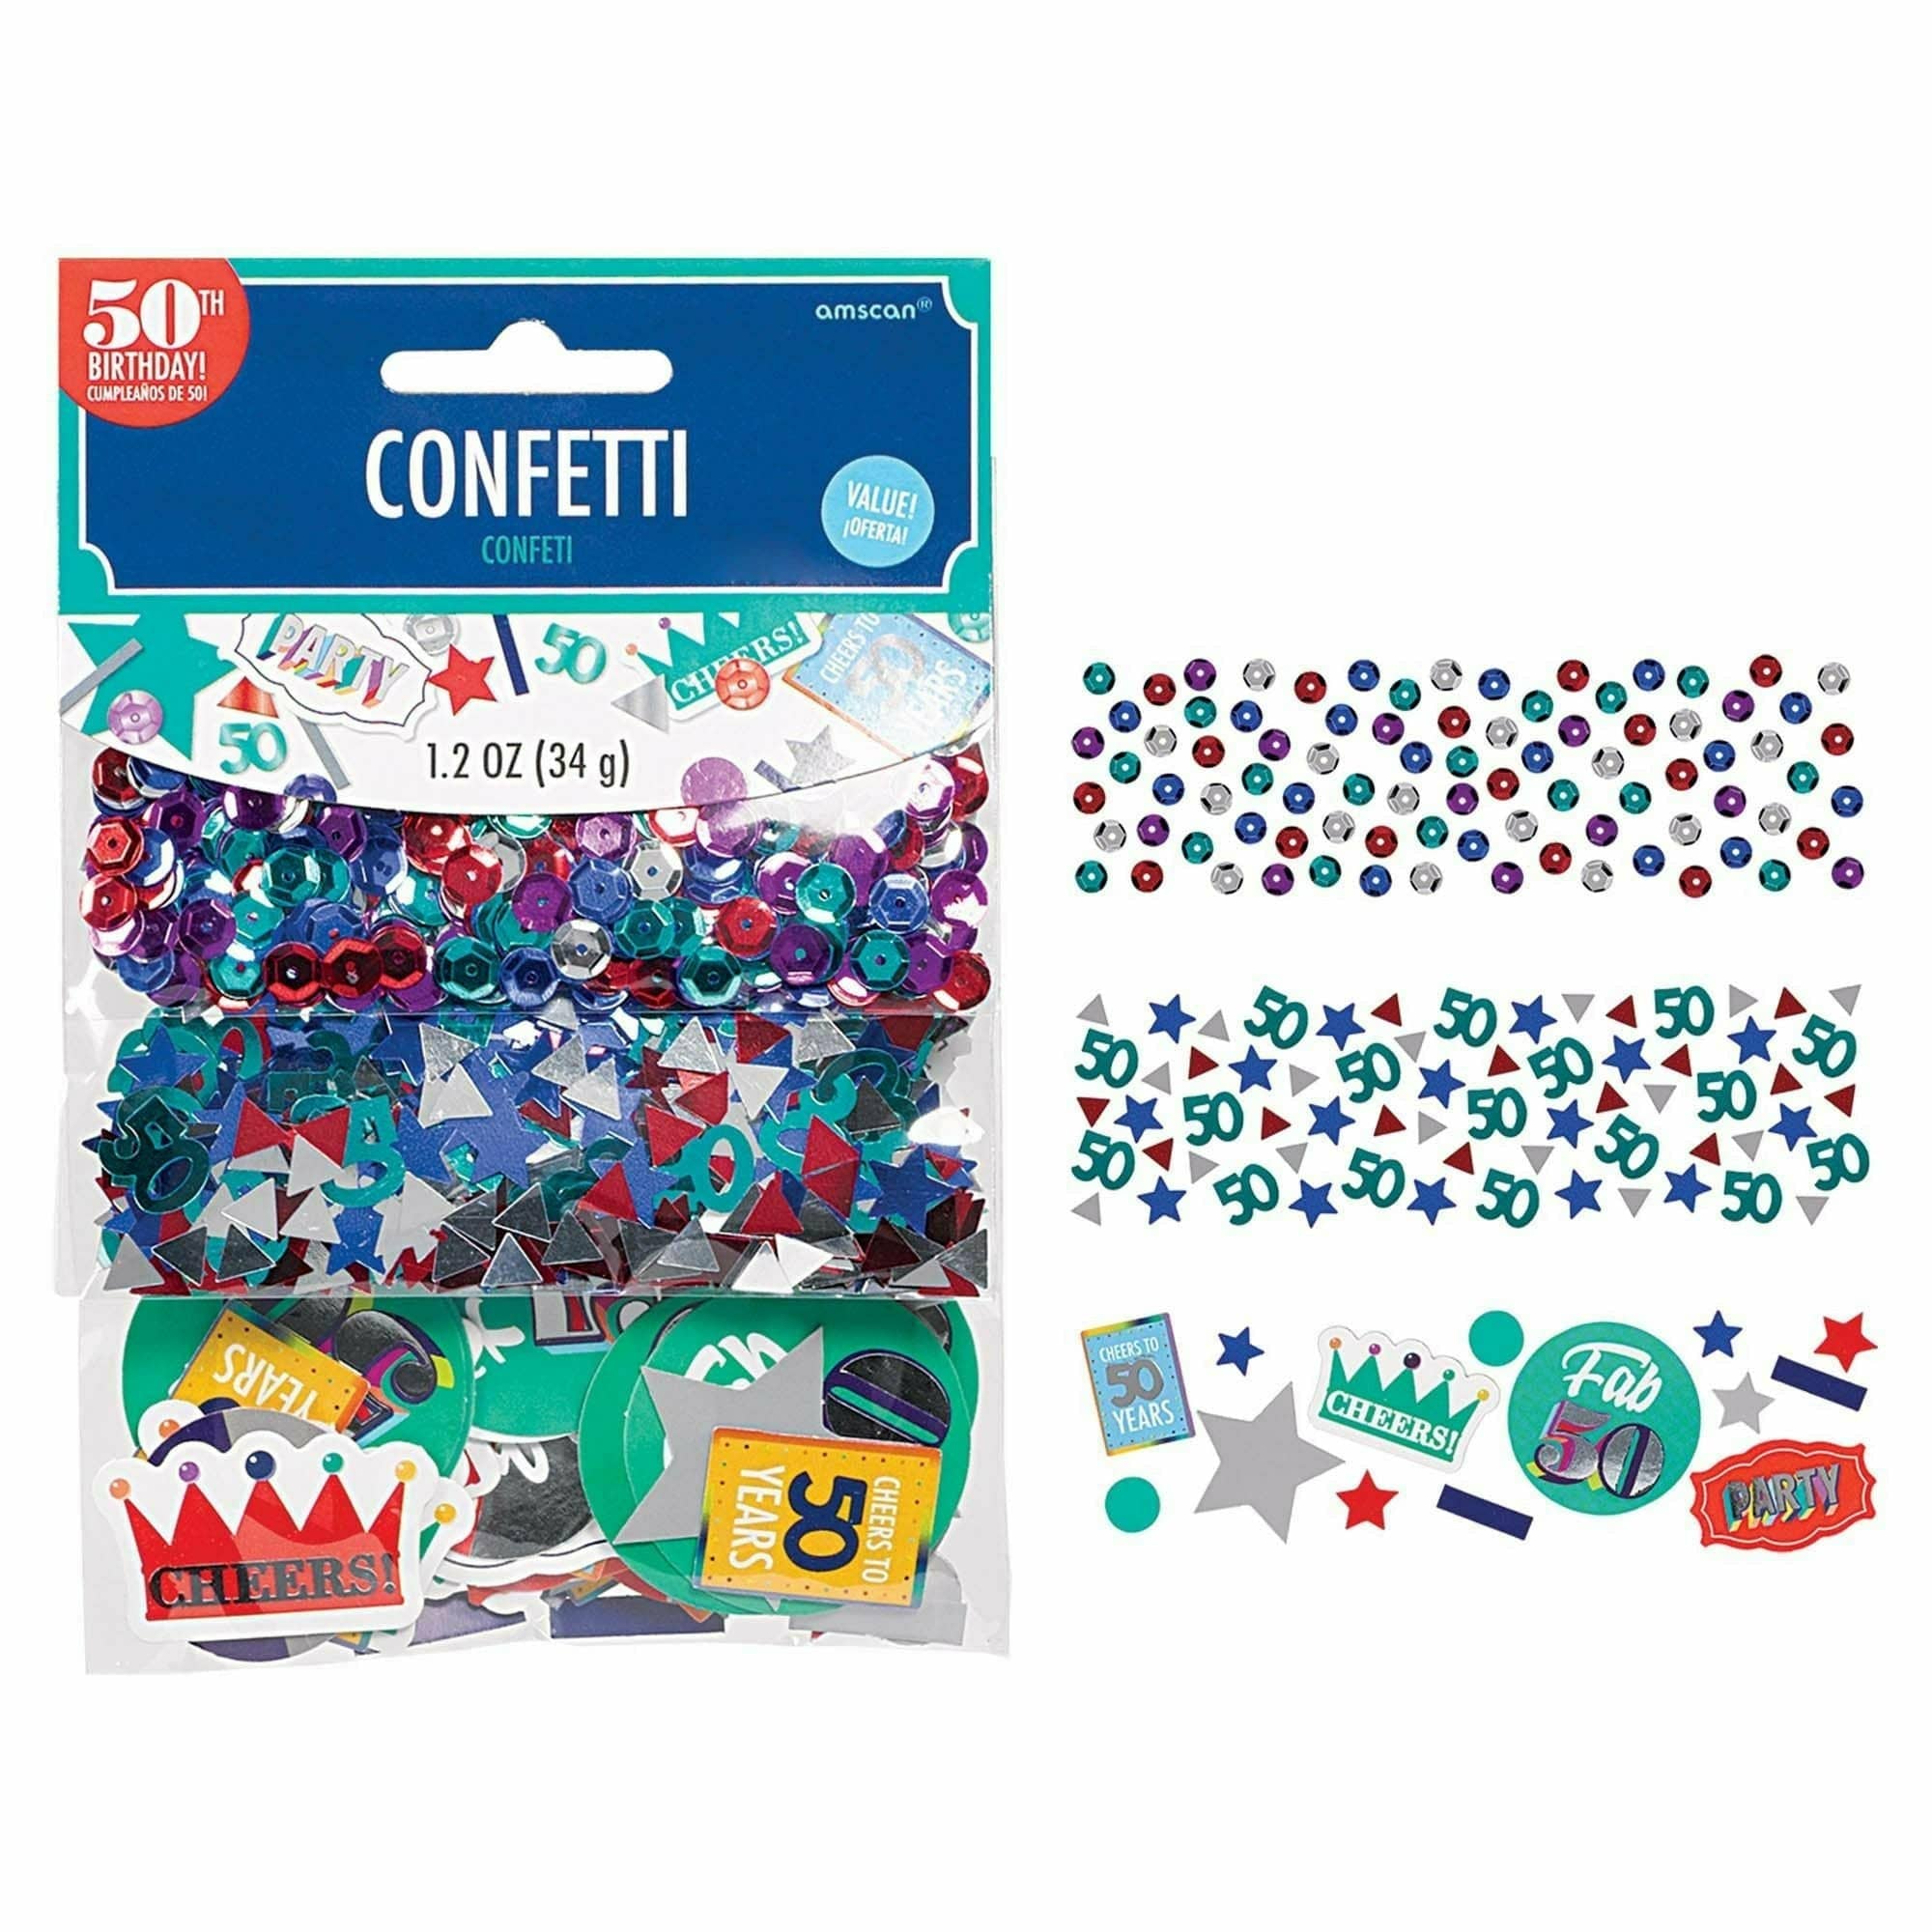 Amscan BIRTHDAY Value Pack Confetti - Here's To 50